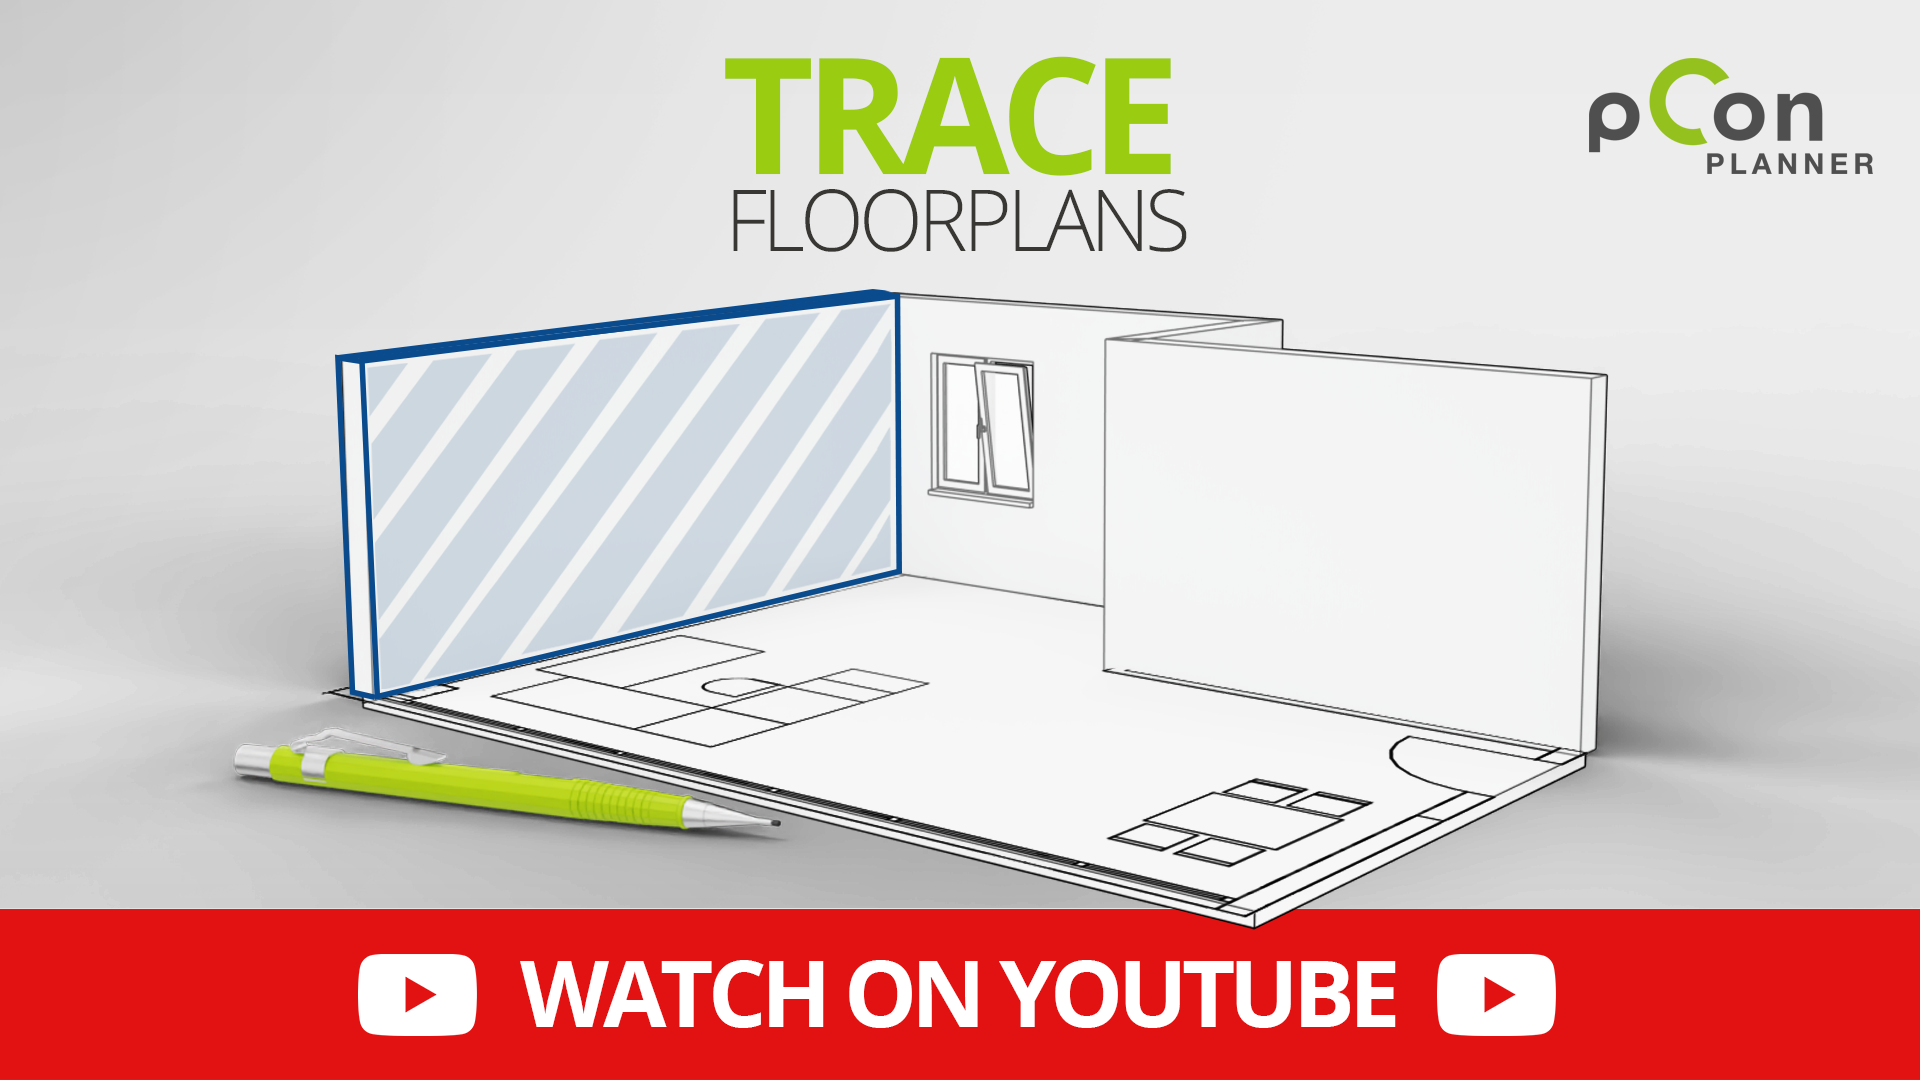 In our new tutorial video, we'll show you some tricks to keep in mind in order to capture a 2D floor plan quickly and accurately